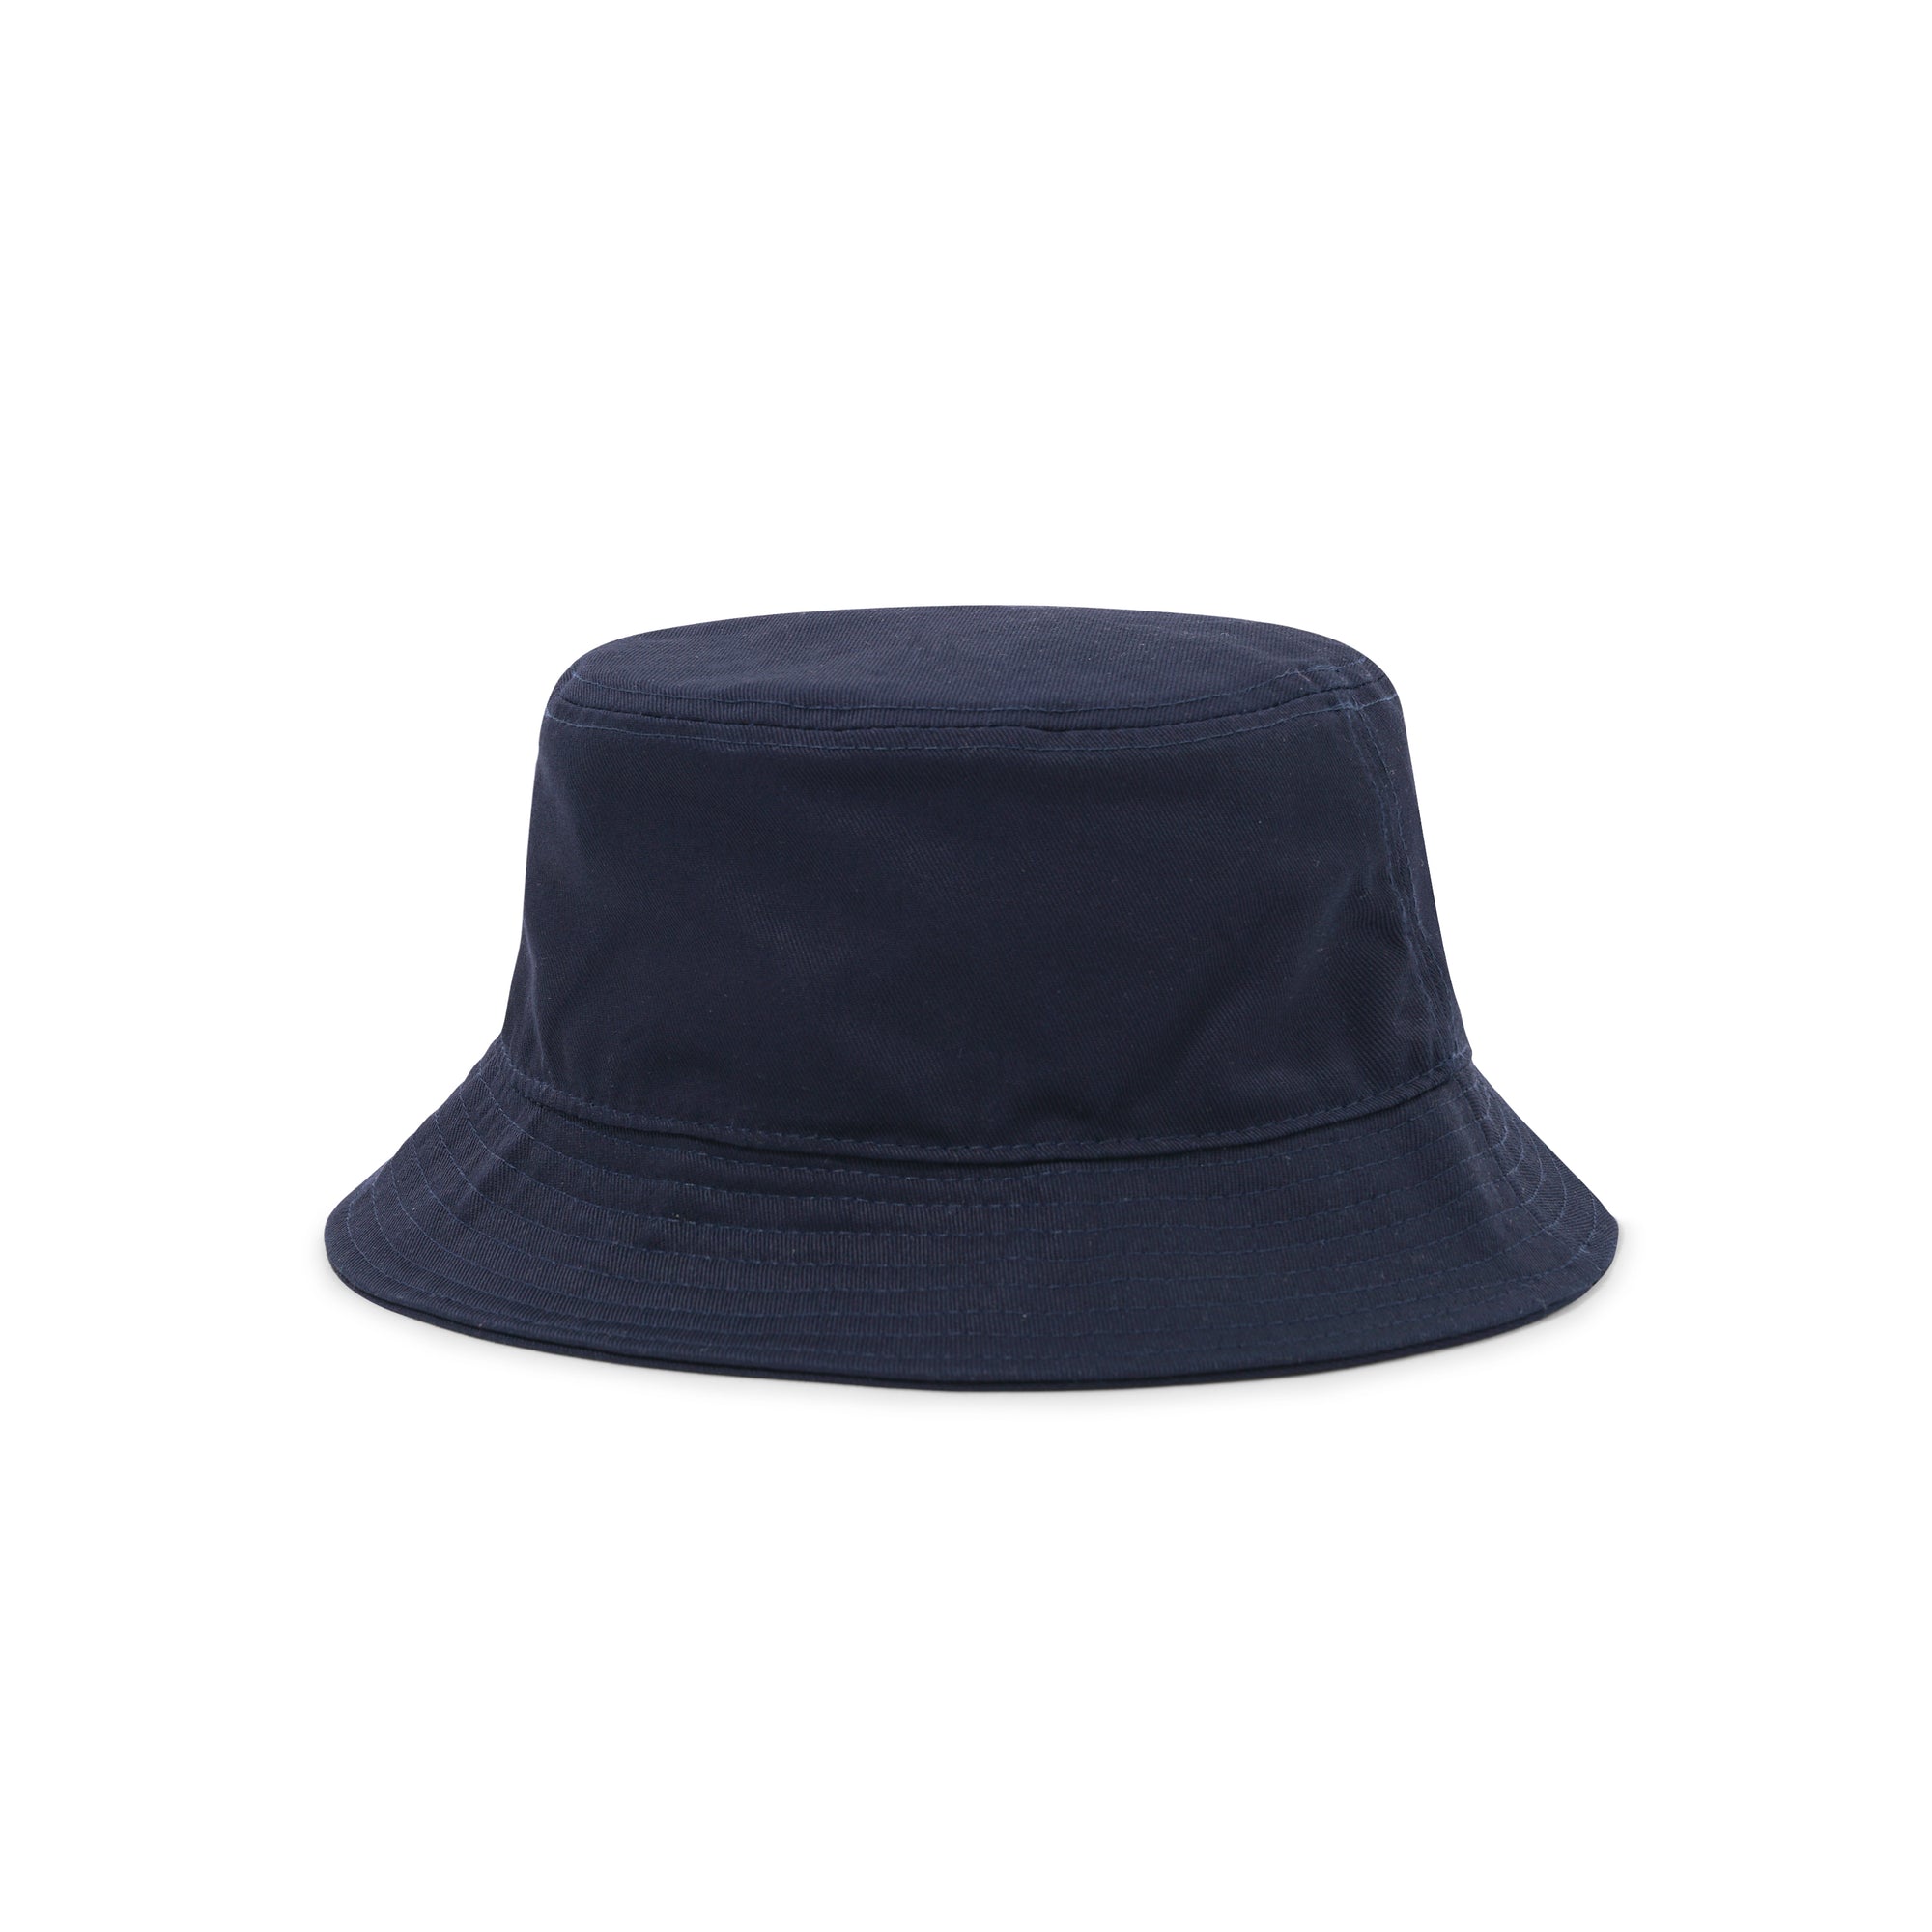 Cash Only Corp Logo Bucket Hat Navy